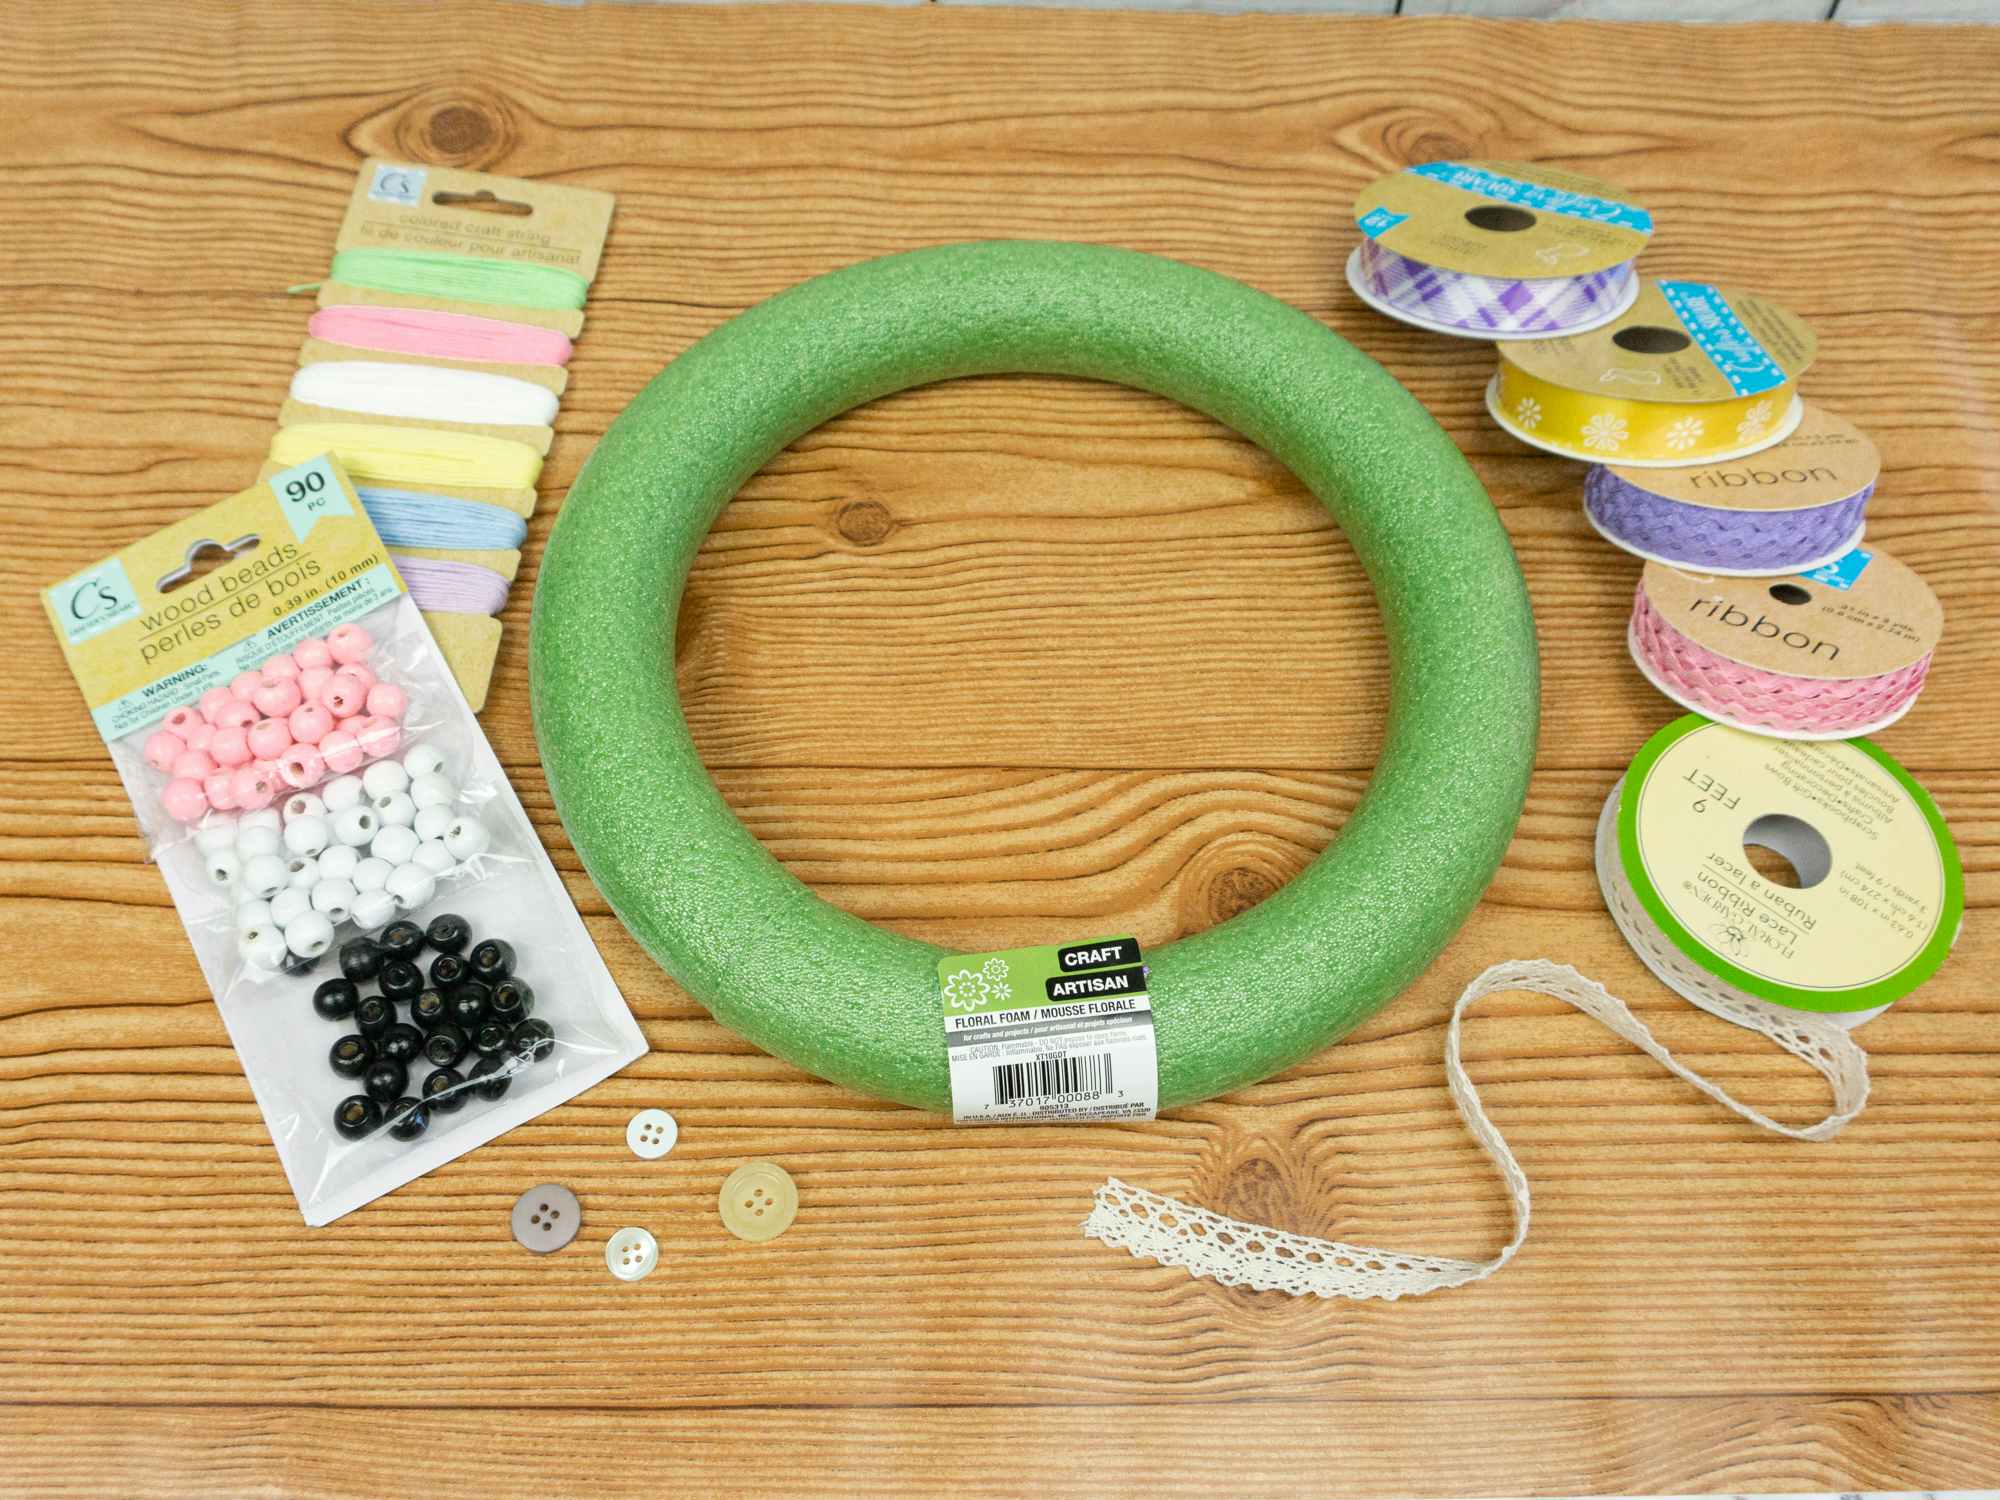 Materials for a spring wreath including several types of ribbon, wood beads, buttons, and a wreath form